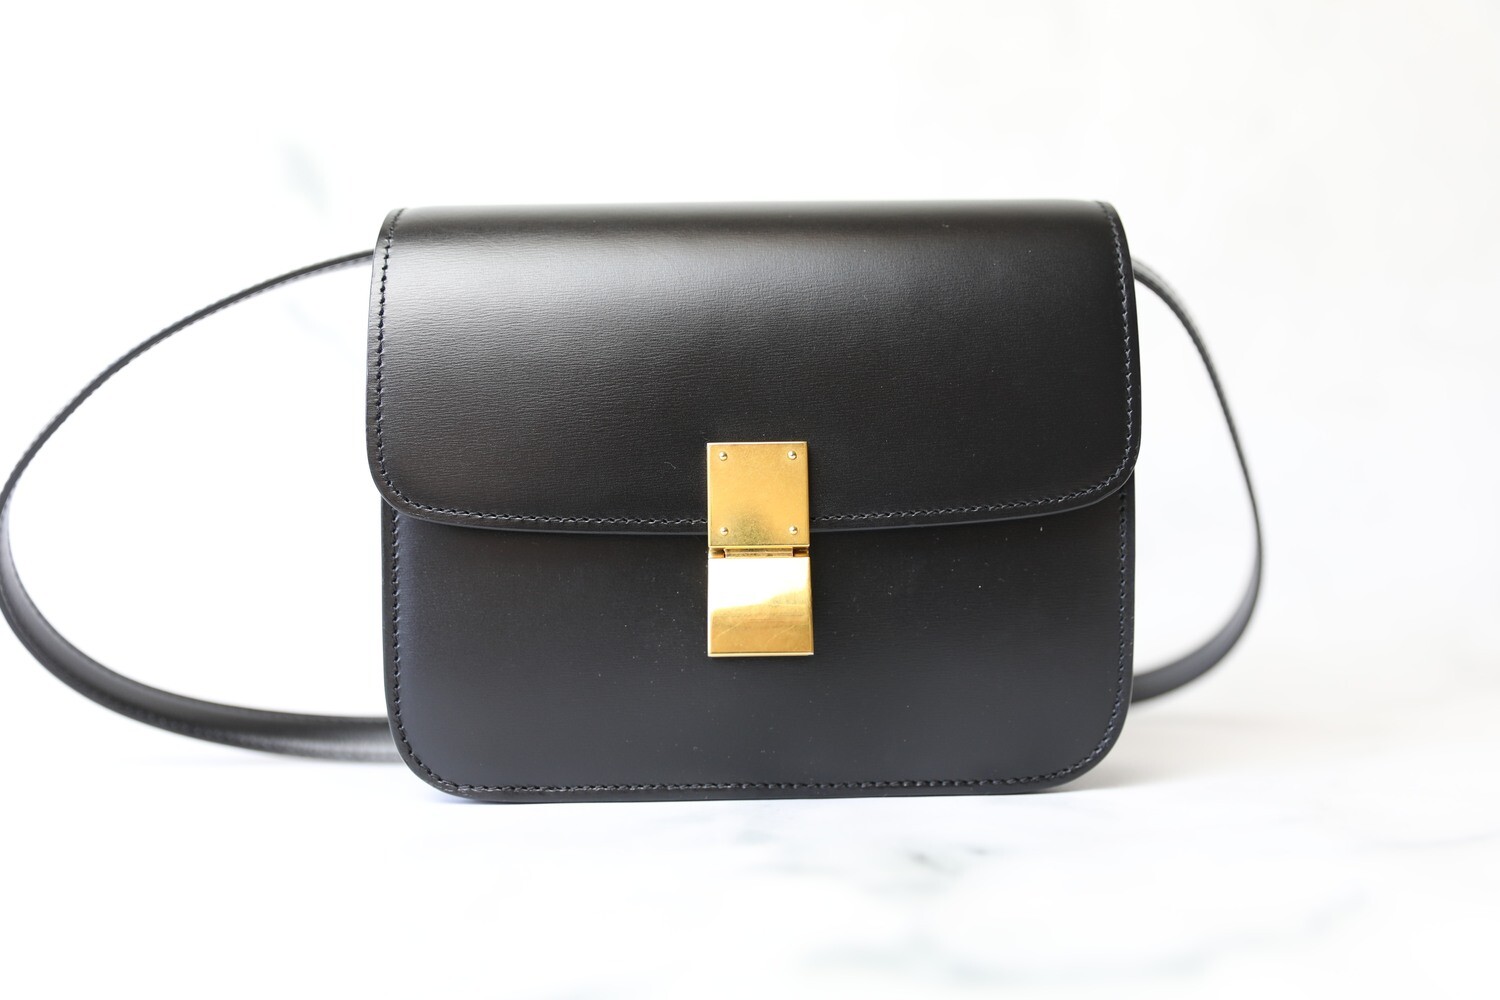 Celine Box Bag Teen, Black with Gold Hardware, Preowned in Dustbag WA001